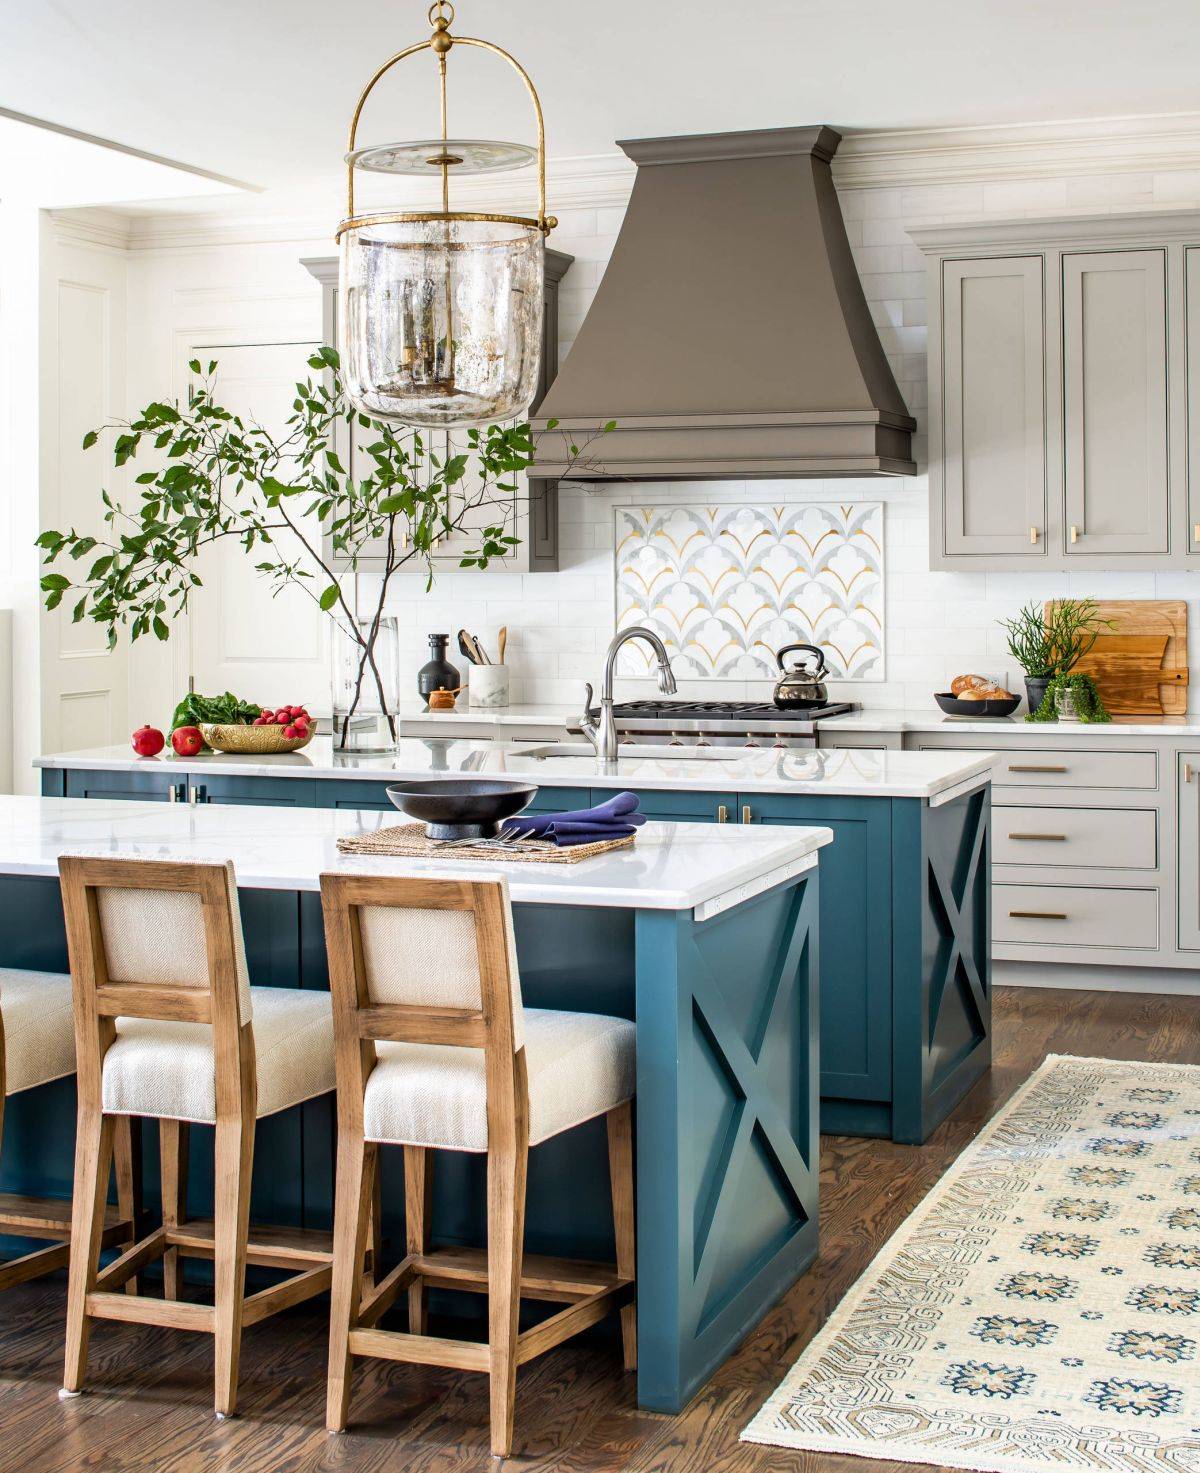 Twin kitchen islands in blue with white countertops are just perfect for this modern farmhouse style kitchen